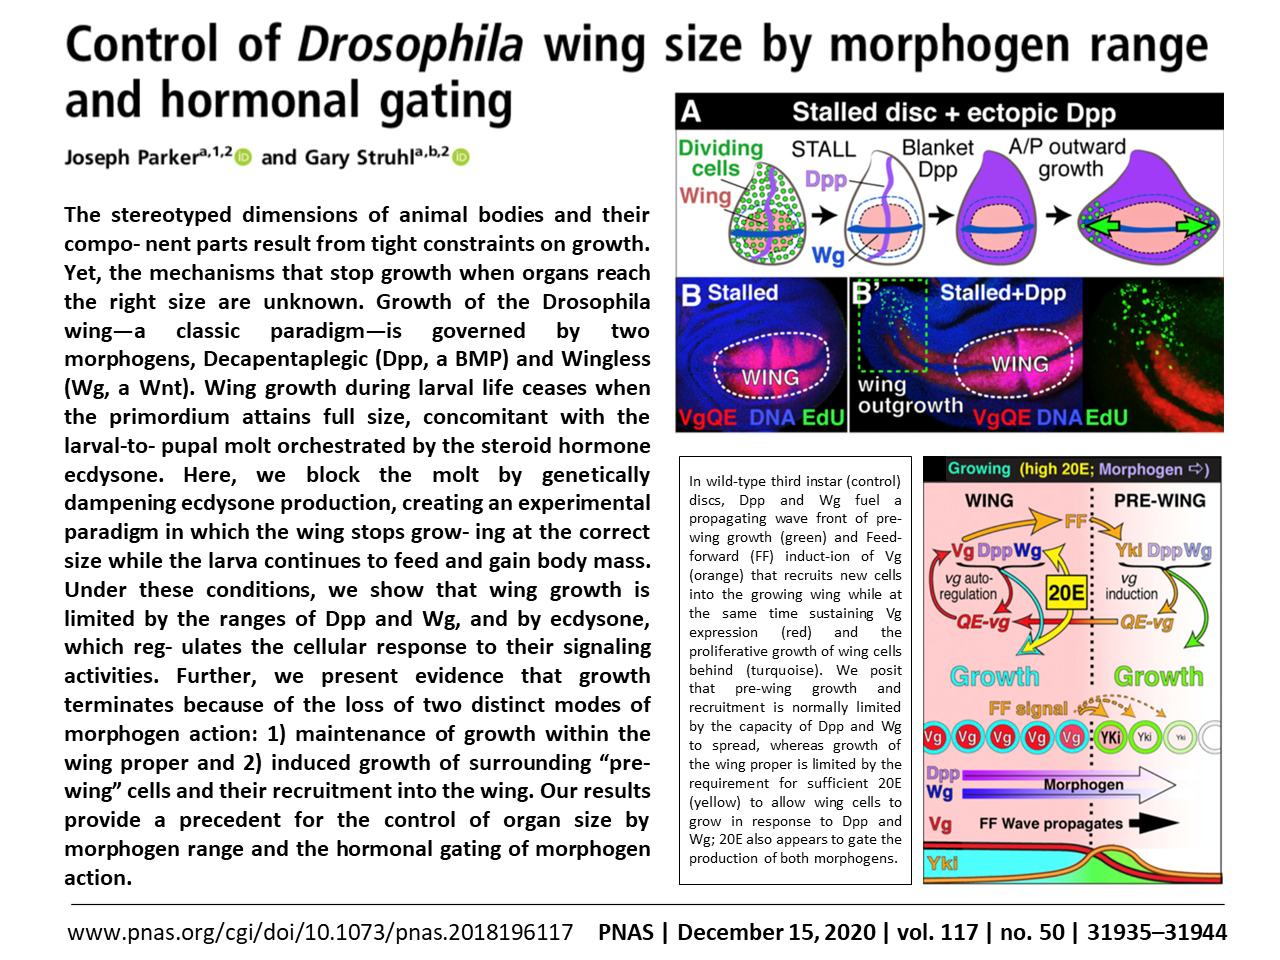 Control of Drosophila wing size by morphogen range and hormonal gating